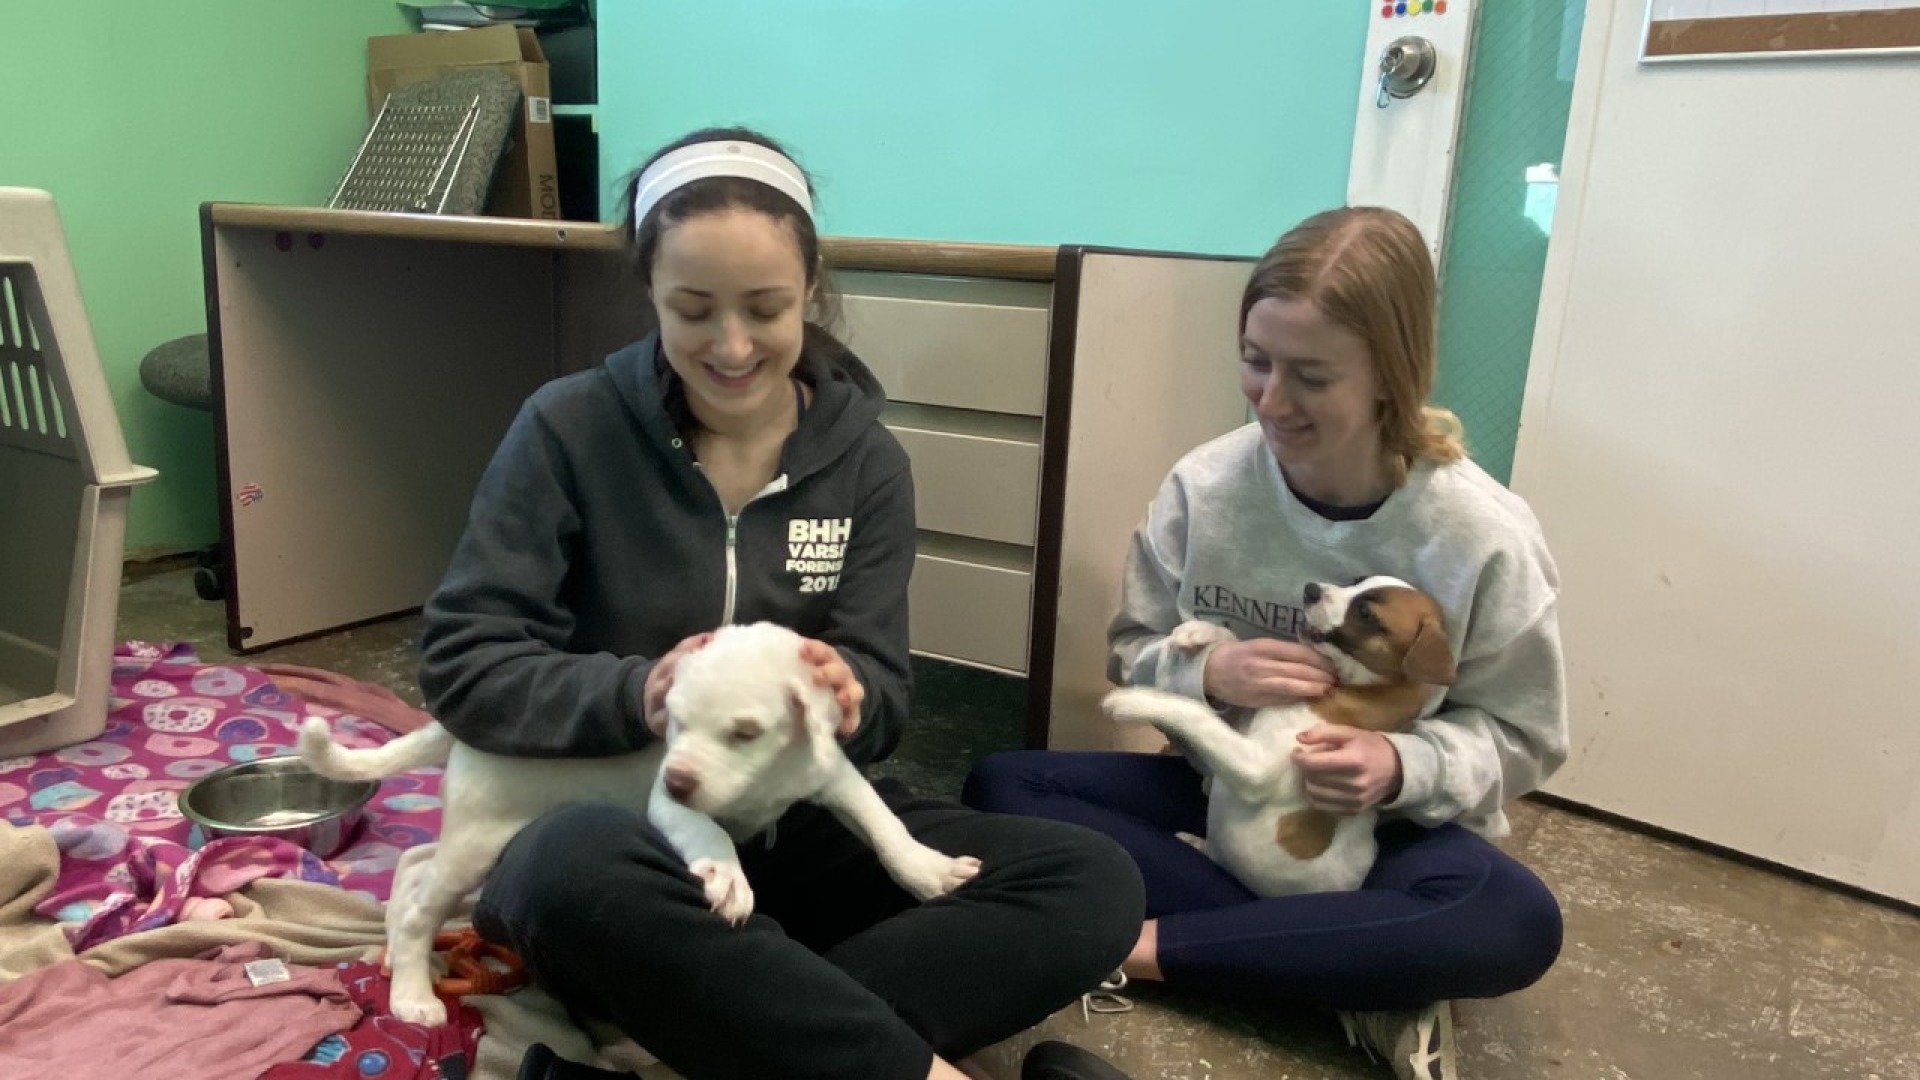 one woman pets a white puppy and the other a brown and white puppy